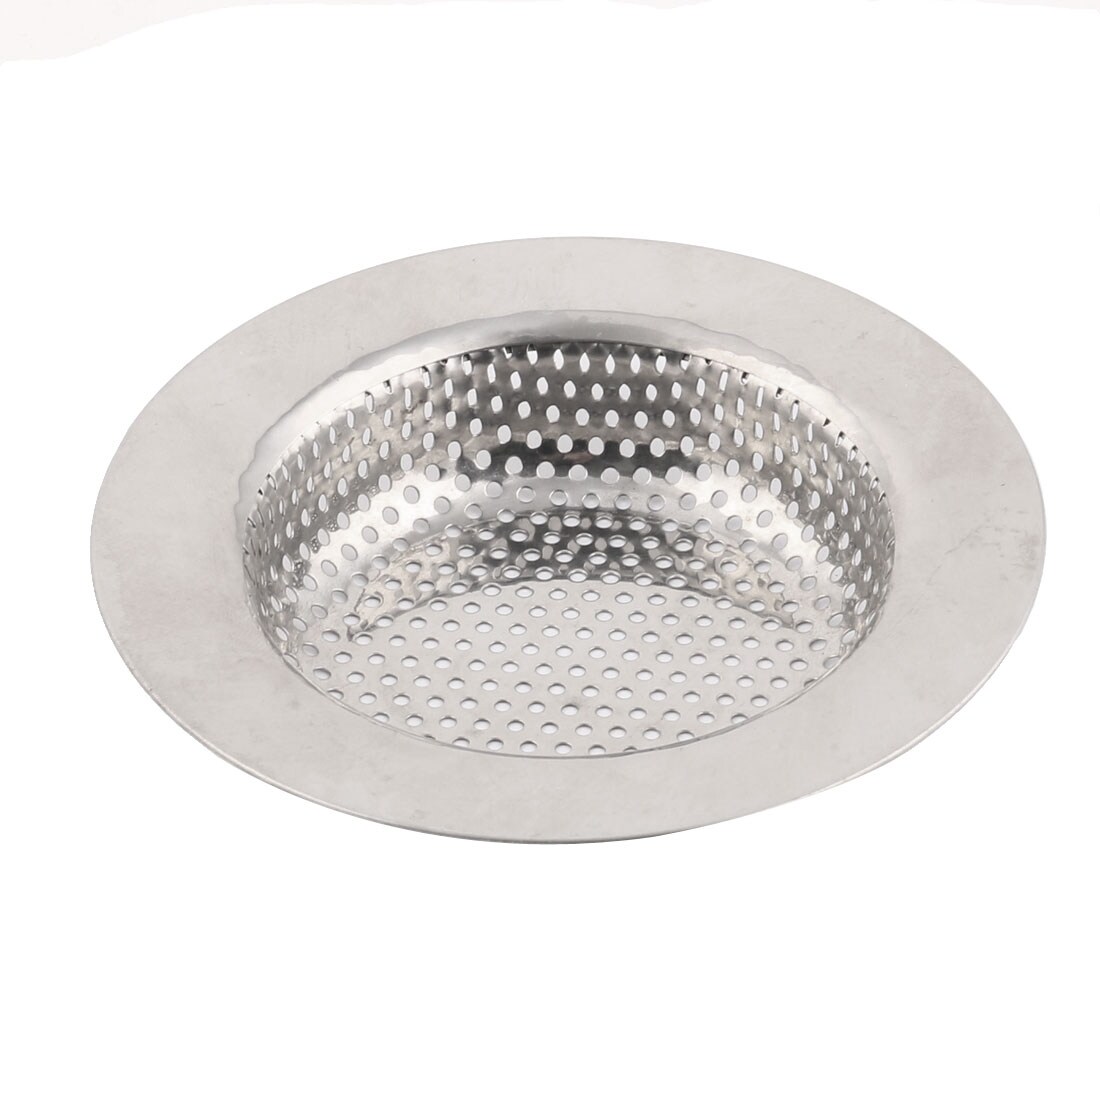 https://ak1.ostkcdn.com/images/products/is/images/direct/3328d615f8bf7e079fef266891b6107bc36e8ac6/Kitchen-Stainless-Steel-Double-Layer-Rim-Drain-Sink-Mesh-Strainer.jpg